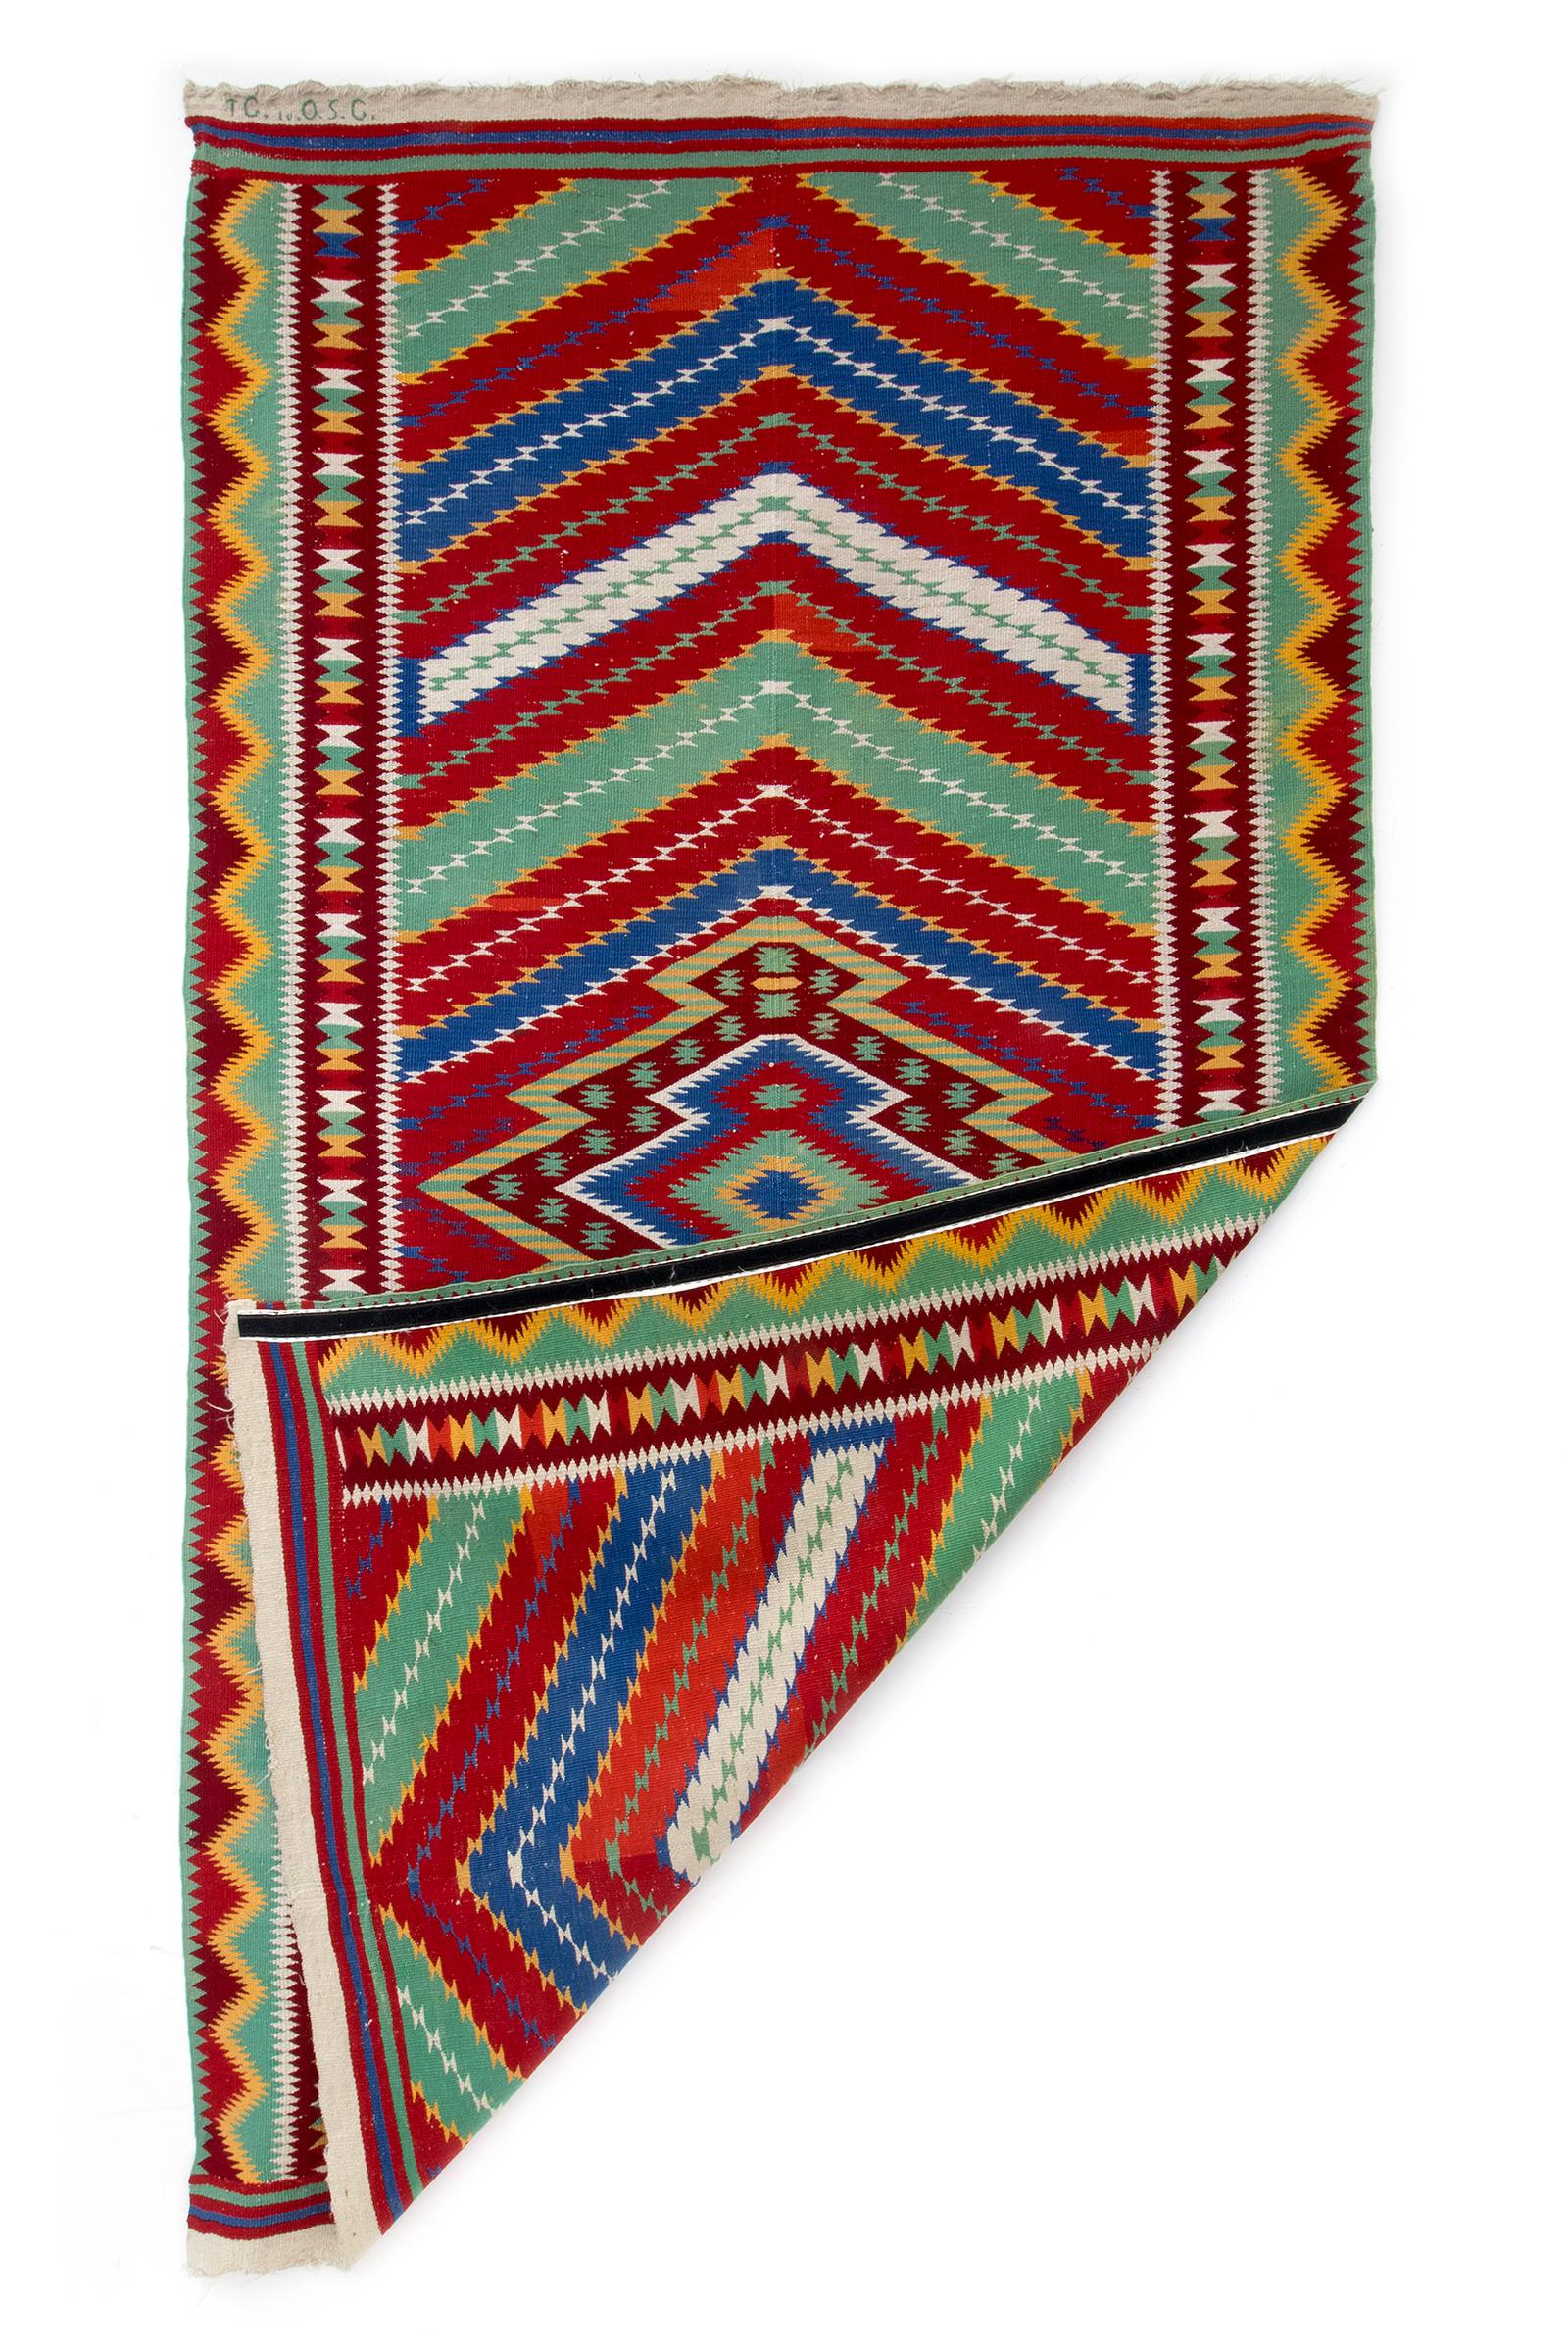 Antique circa 1880 Rio Grande Saltillo Sarape, hand woven of Germantown yarns in colors of red, green, golden yellow, blue, and white in a diamond pattern, fringed at either end.  Ready to hang on the wall with custom velcro mount (fully removable).